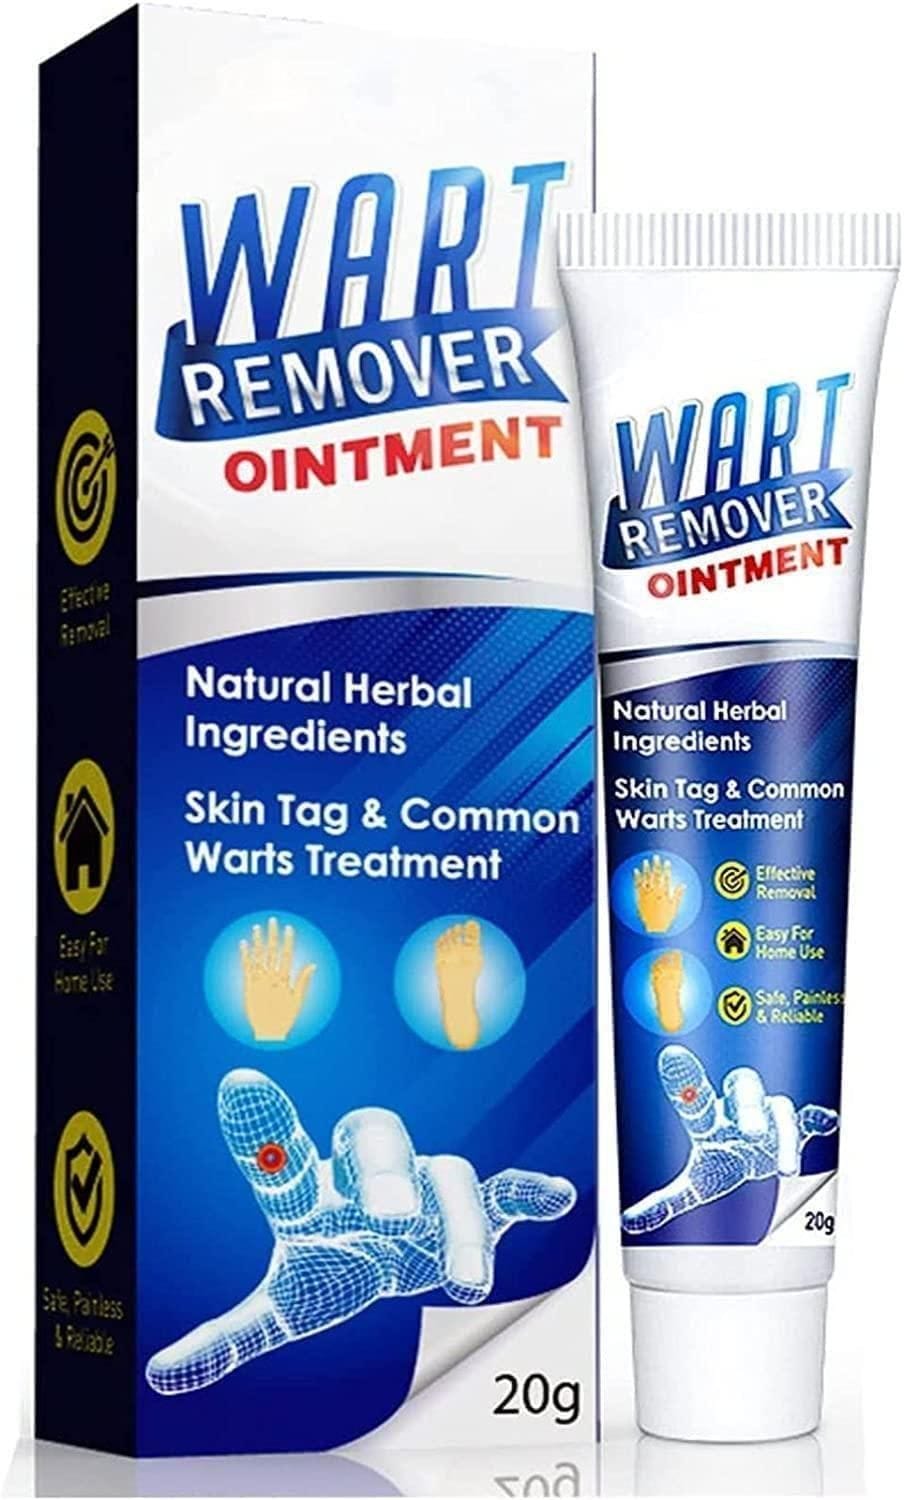 ointment 100g Warts Off Instant Blemish Removal Cream Wart Remover Ointment for All Skin Types (Pack of 1) Roposo Clout